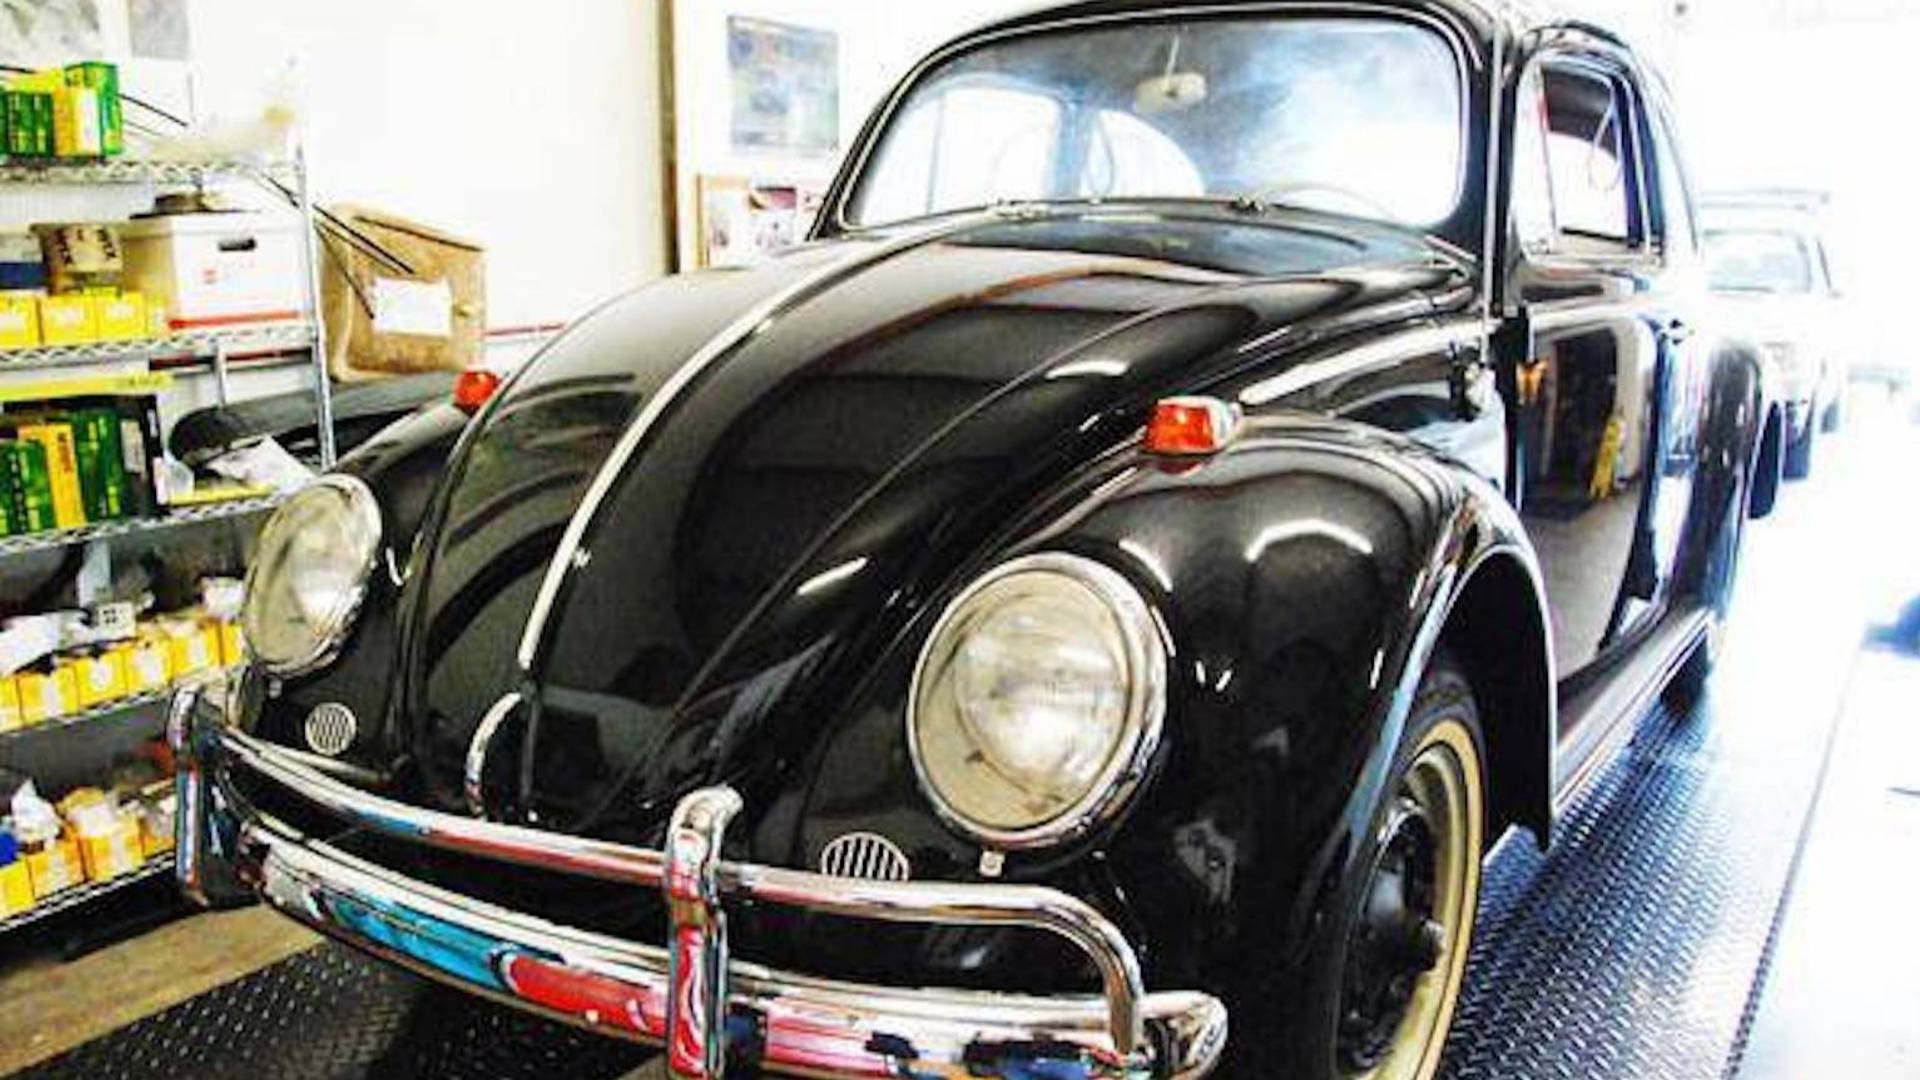 1964 VW Beetle Commands Asking Price of One Million Dollars